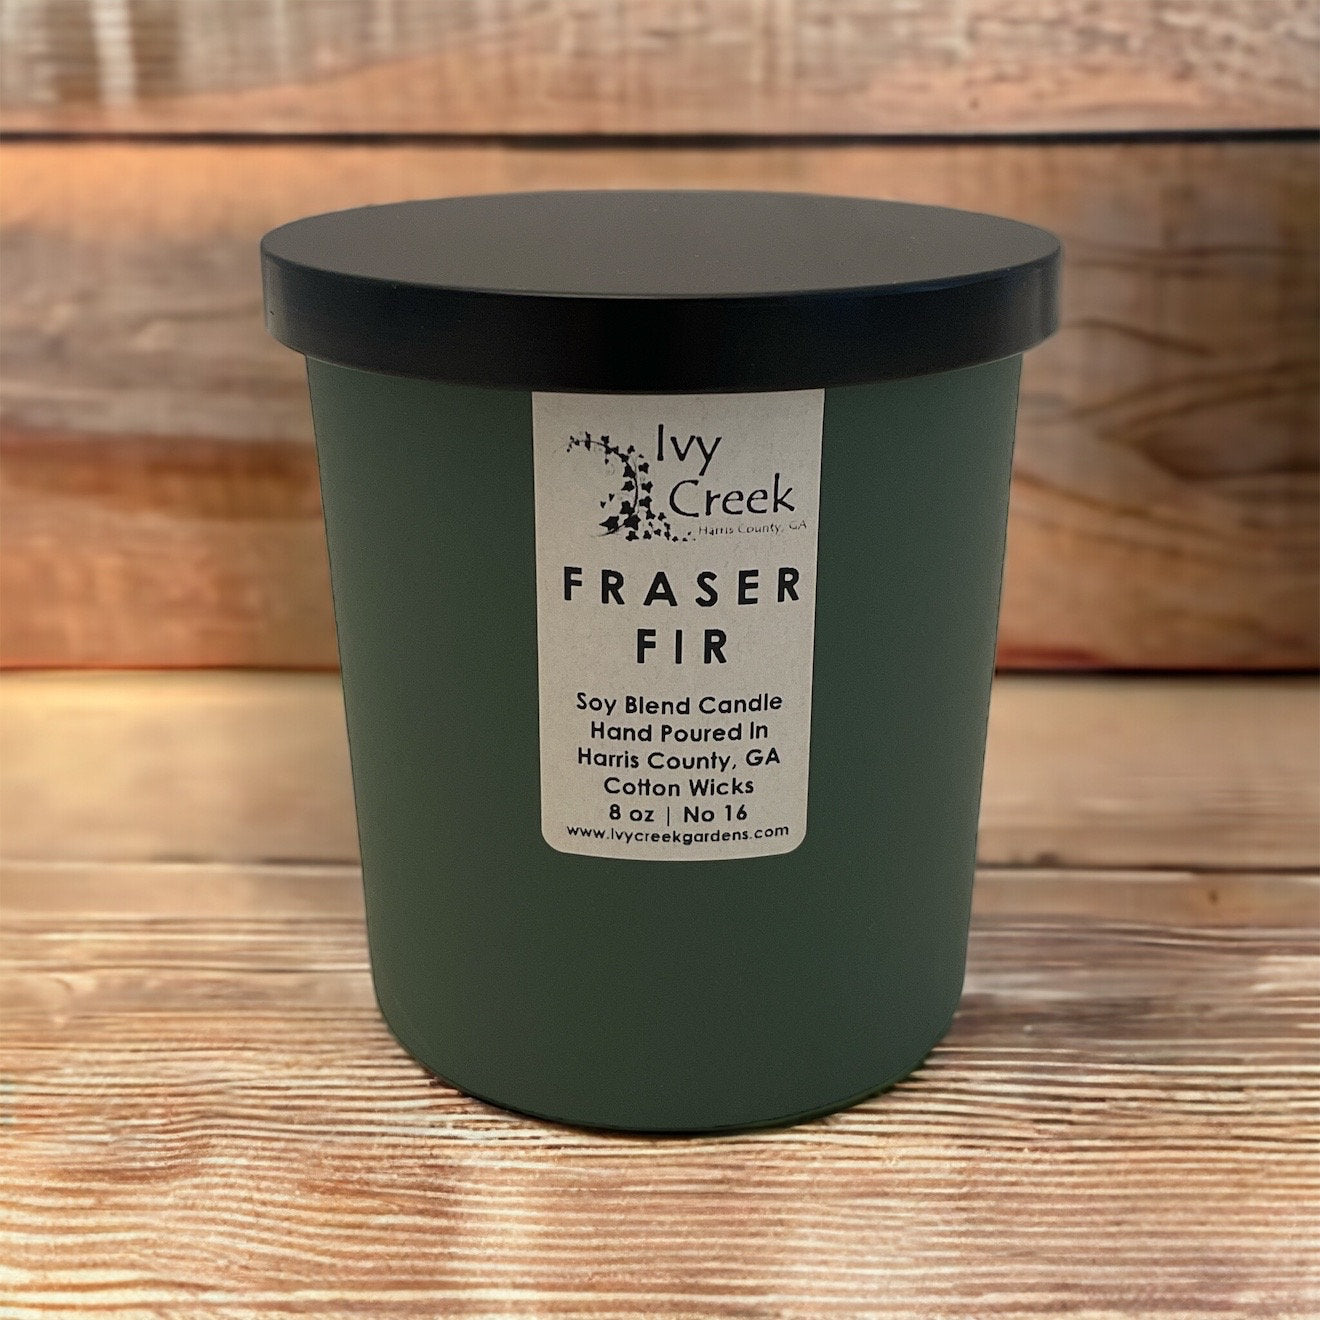 Ivy Creek No 3 | Fraser Fir Soy Blend Candle | Hand Poured | 8 oz | Cotton Wick | Small Batch | Clean Burning | Container Candle | Christmas